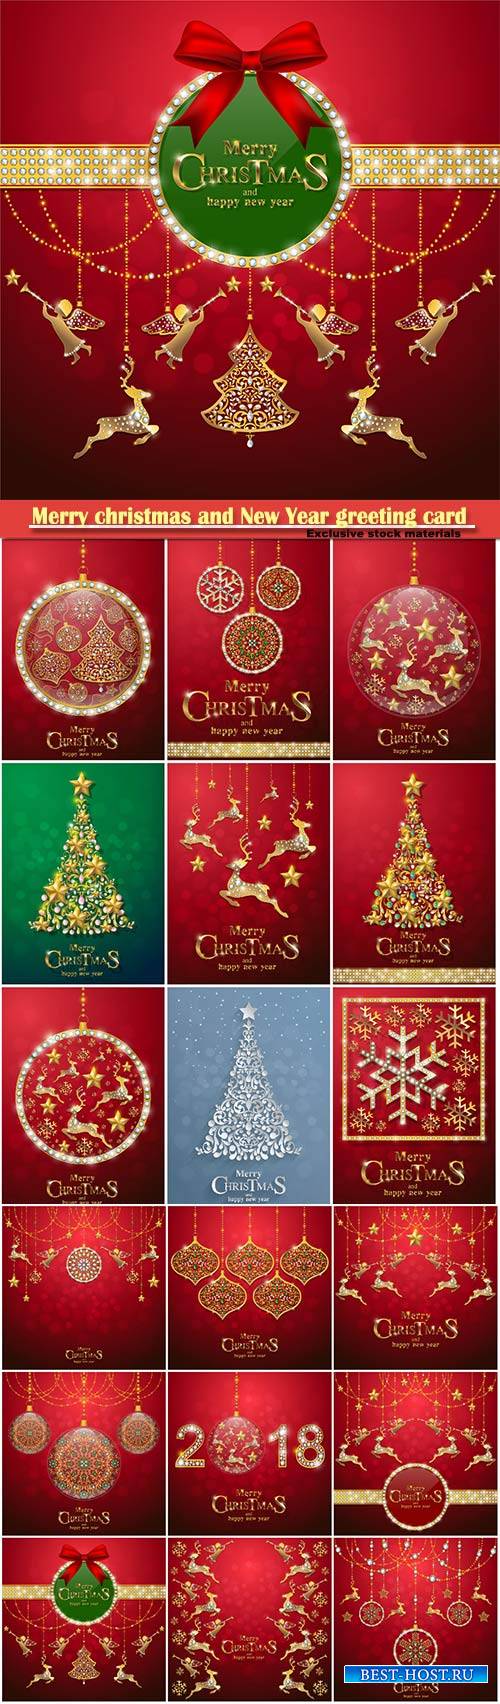 Merry christmas and New Year greeting card vector # 20